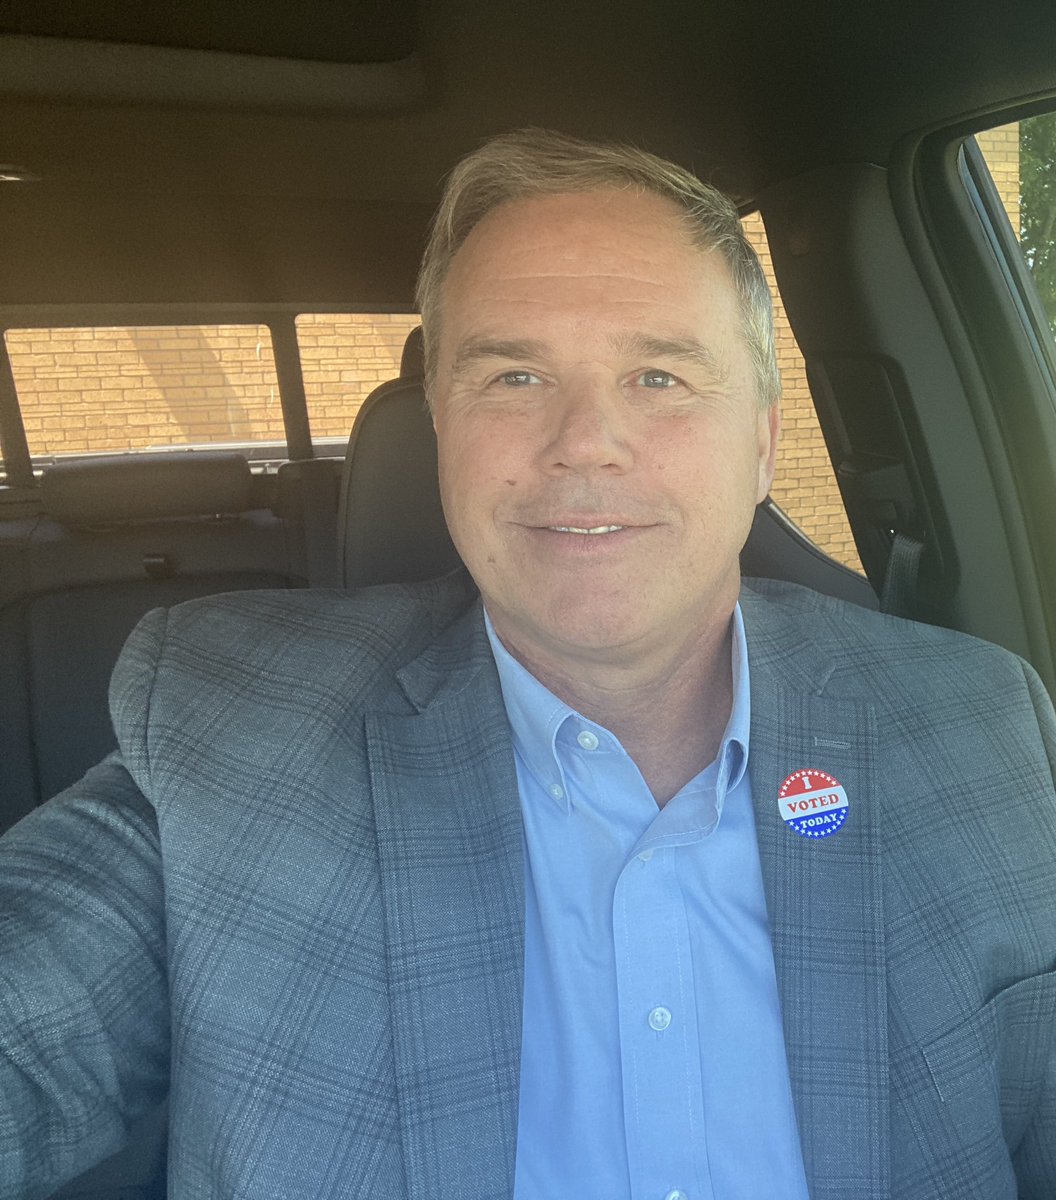 Early voting for the May 4th local elections starts today. During my lunch break, I went to vote and it took my 5 to 10 minutes. Please remember to vote.